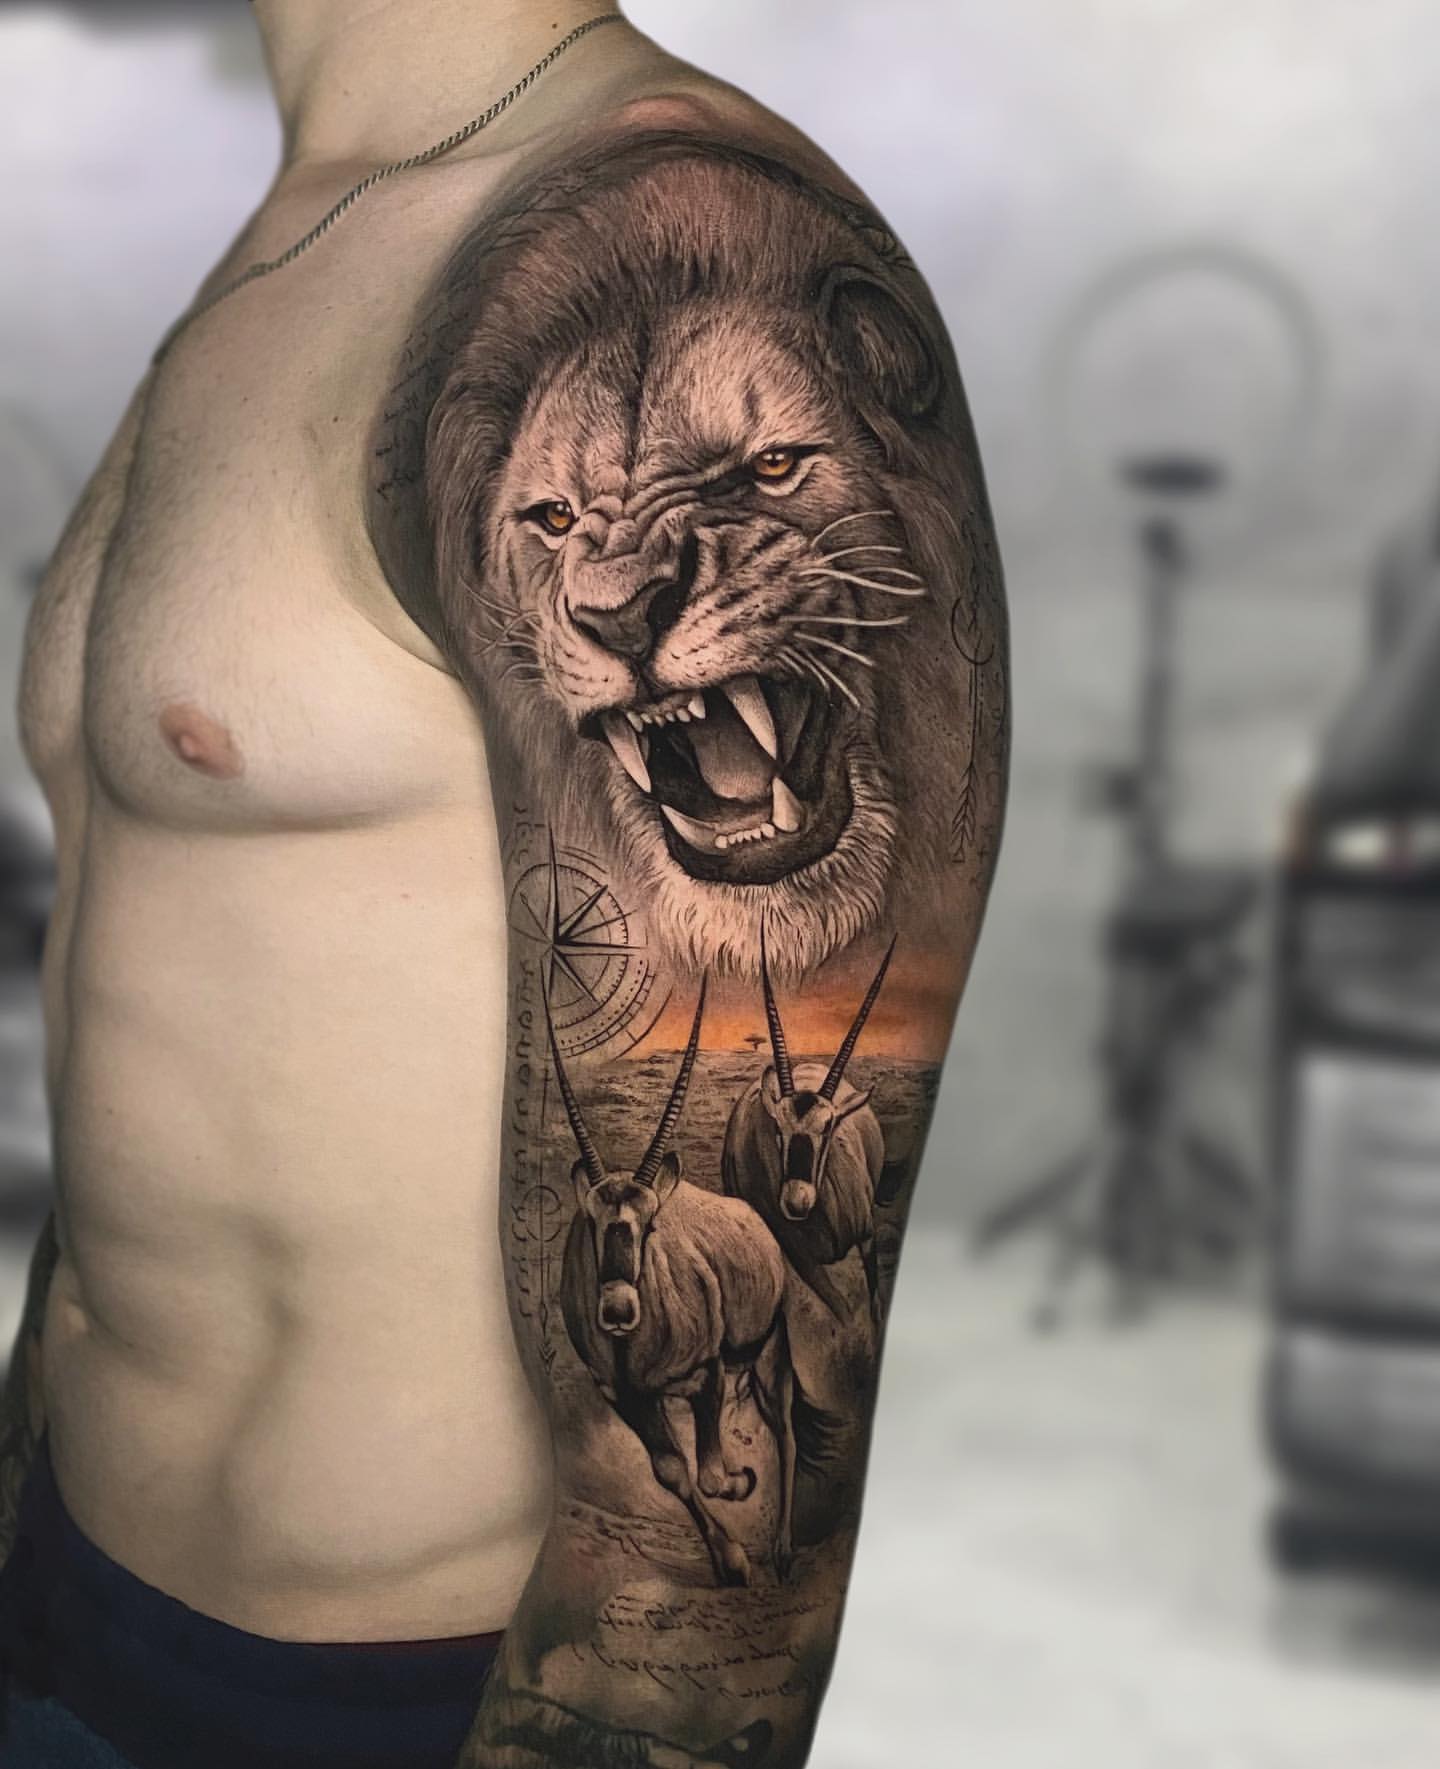 25 Meaningful Leo Tattoos To Consider If You Fall Under This Fire Sign |  The Pagan Grimoire